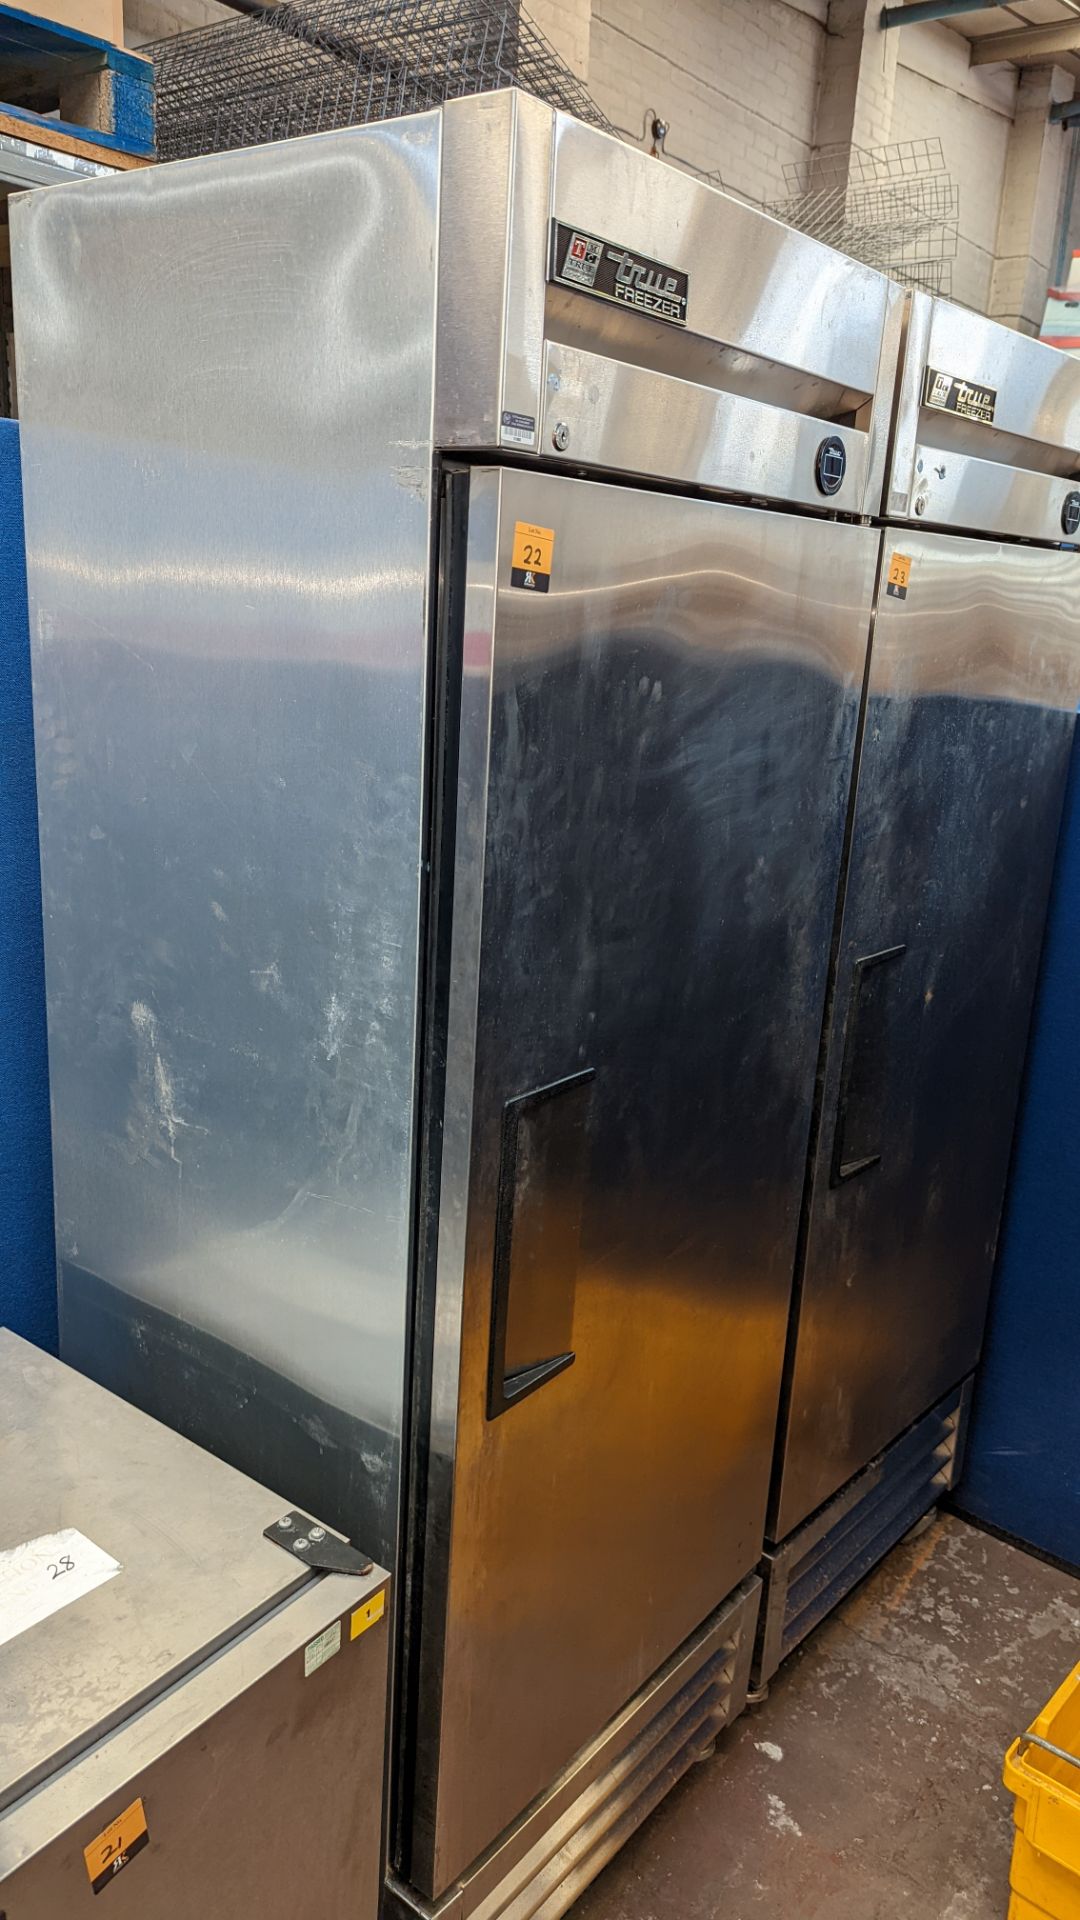 True Refrigeration stainless steel commercial freezer - Image 2 of 5